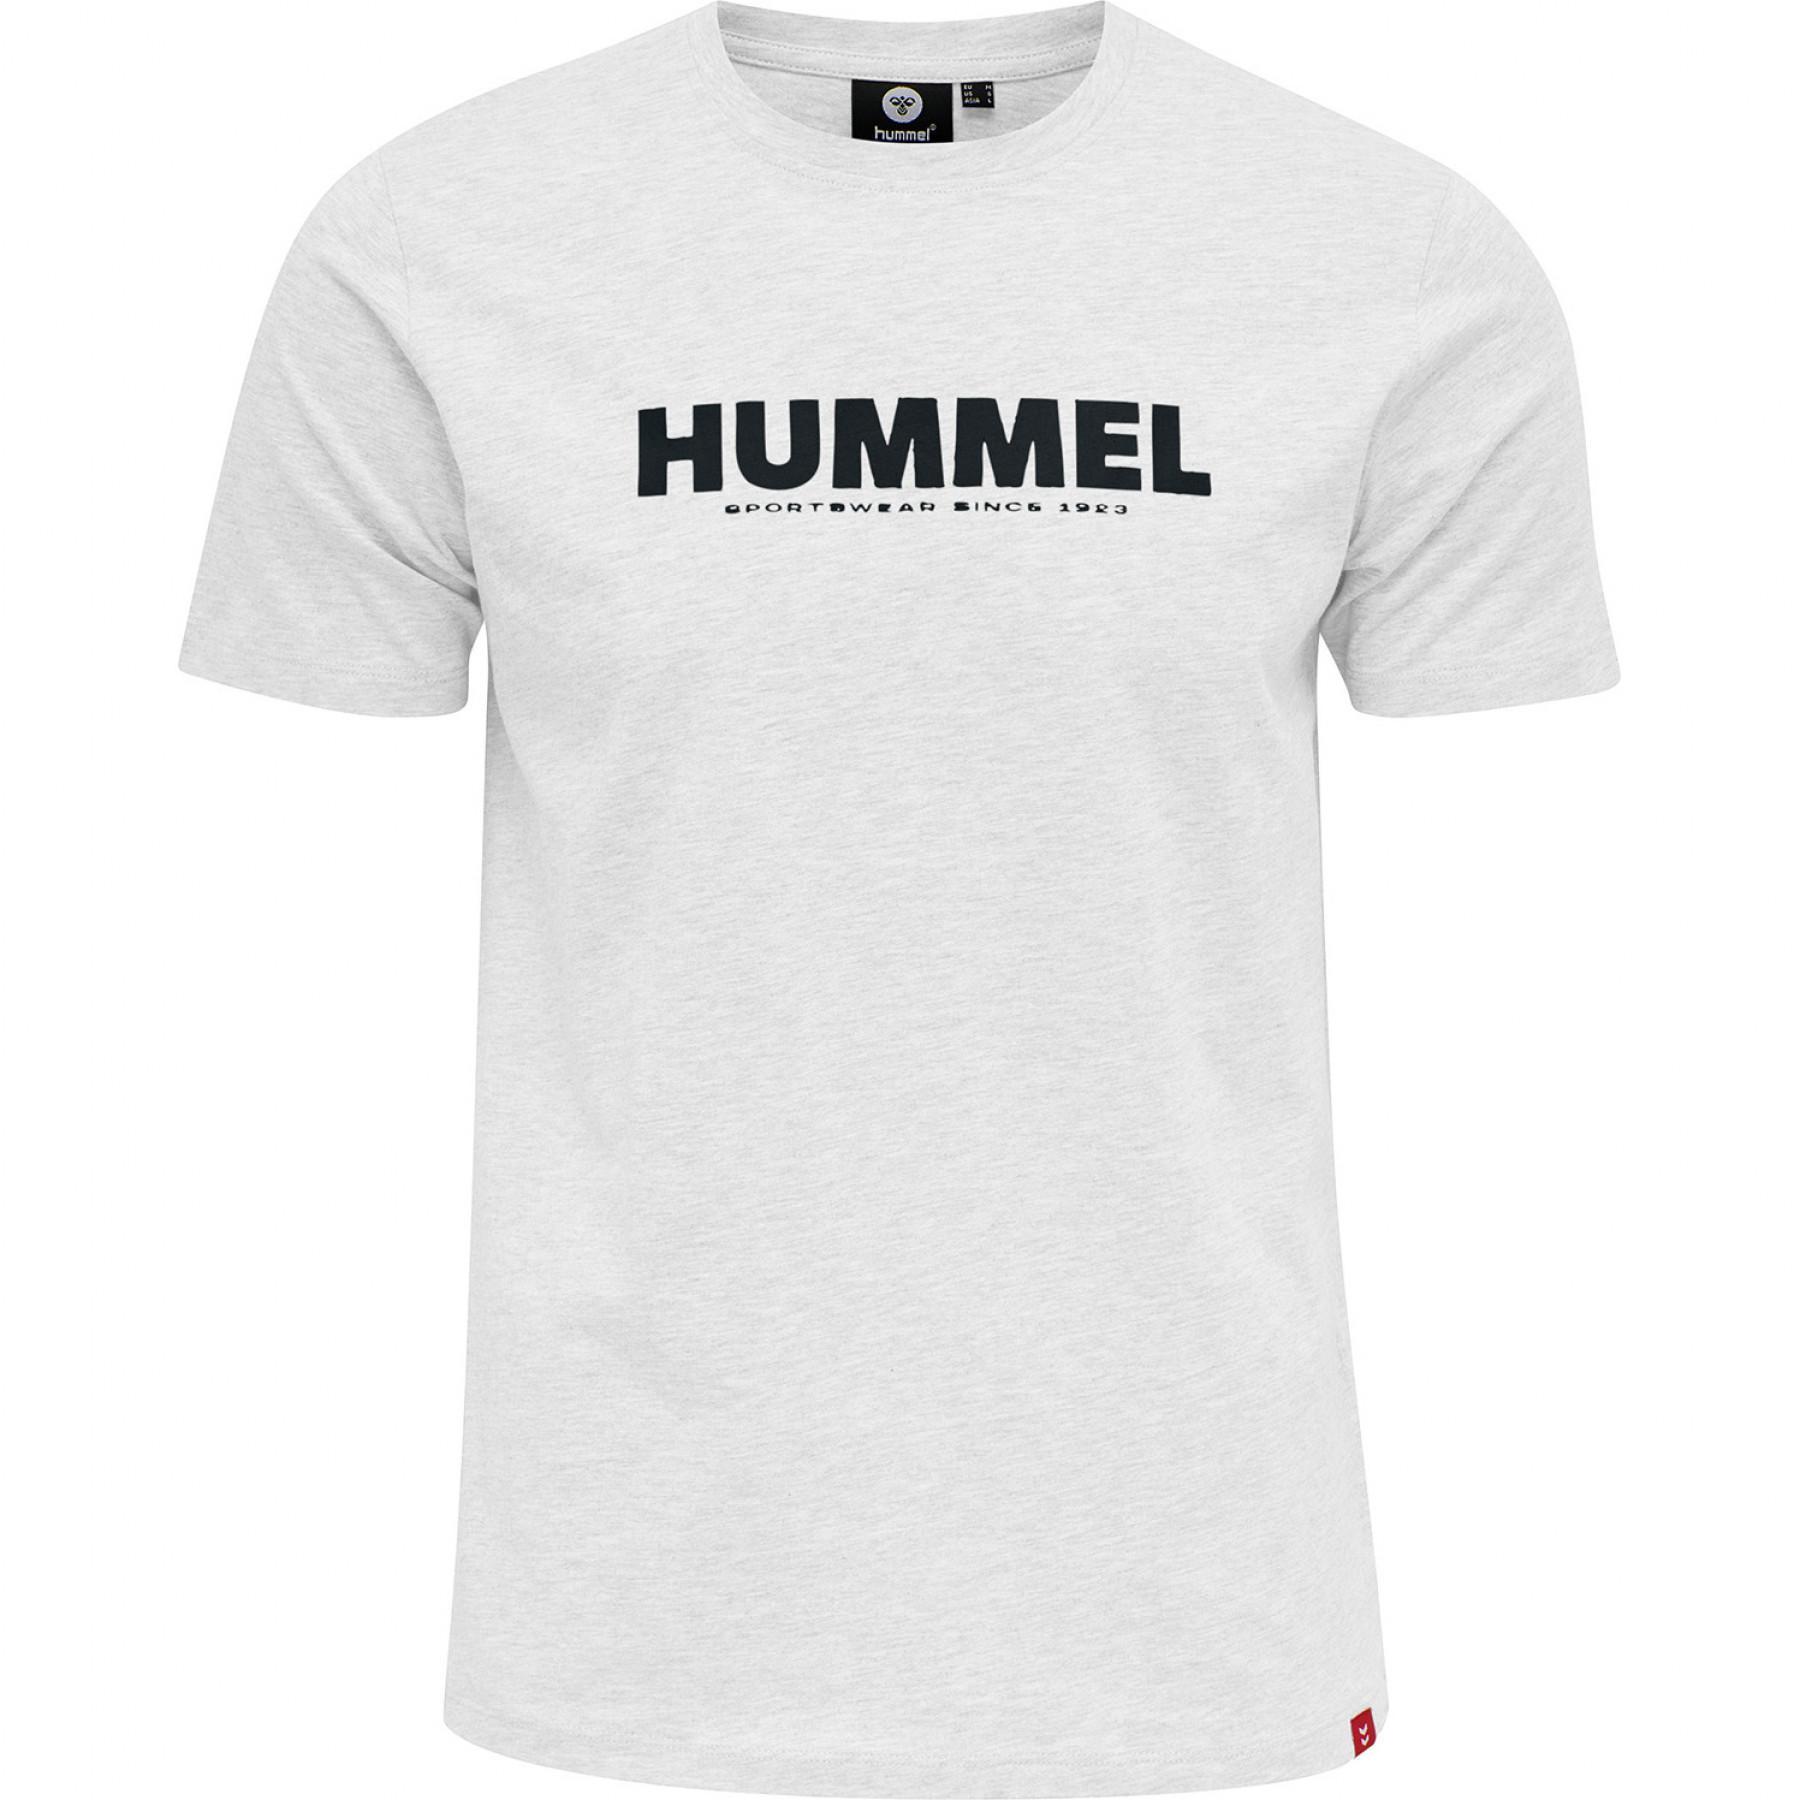 Textile and tennis Hummel T-shirt - polos - Table - hmllegacy T-shirts